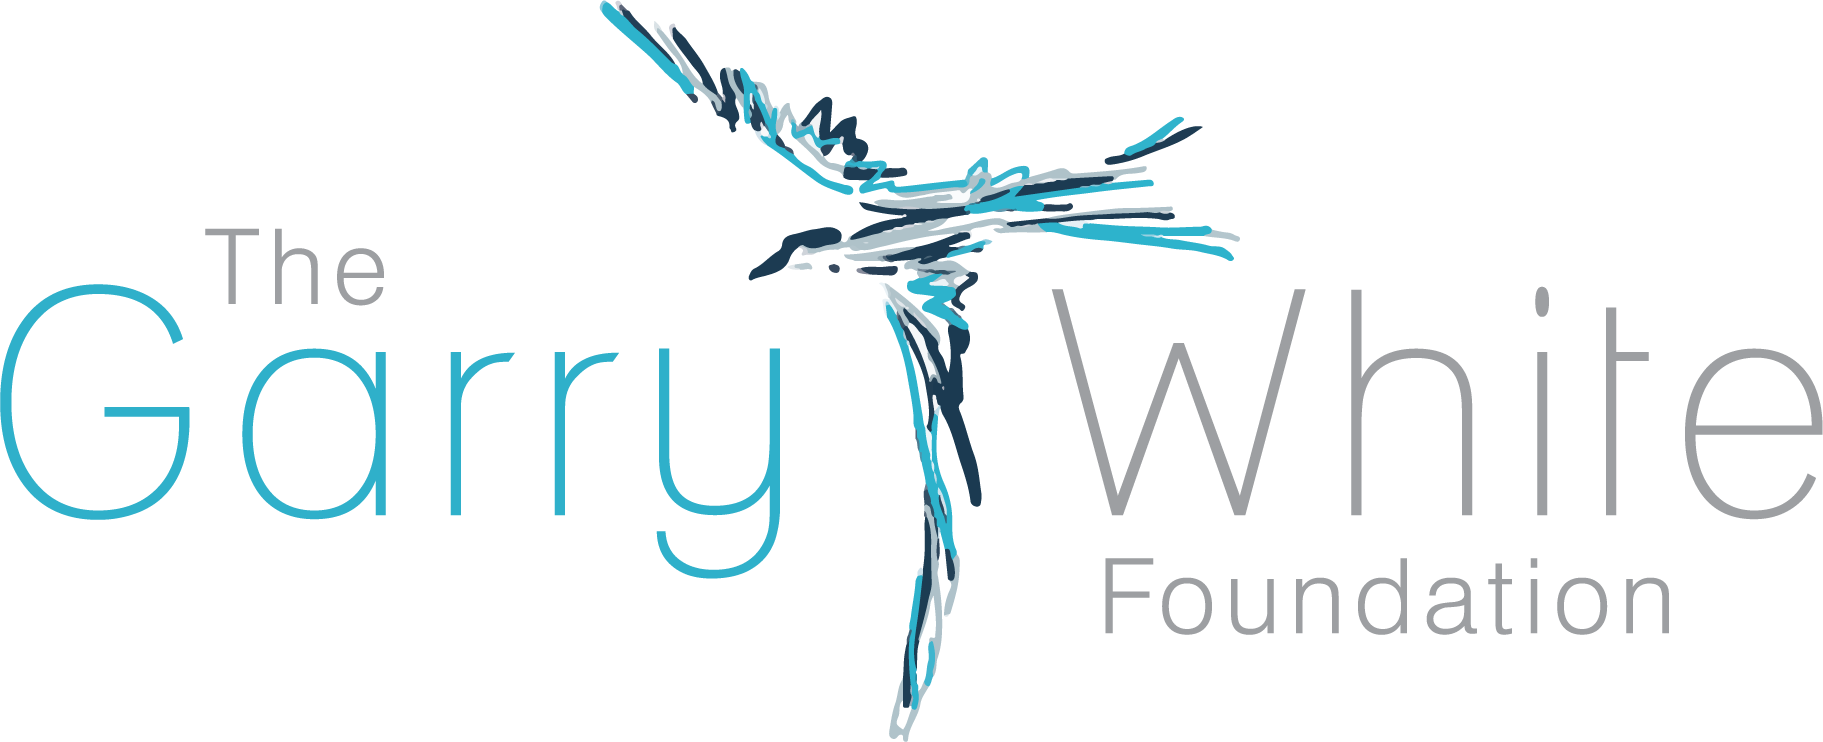 The Garry White Foundation is a philanthropic foundation based in Melbourne, Victoria.